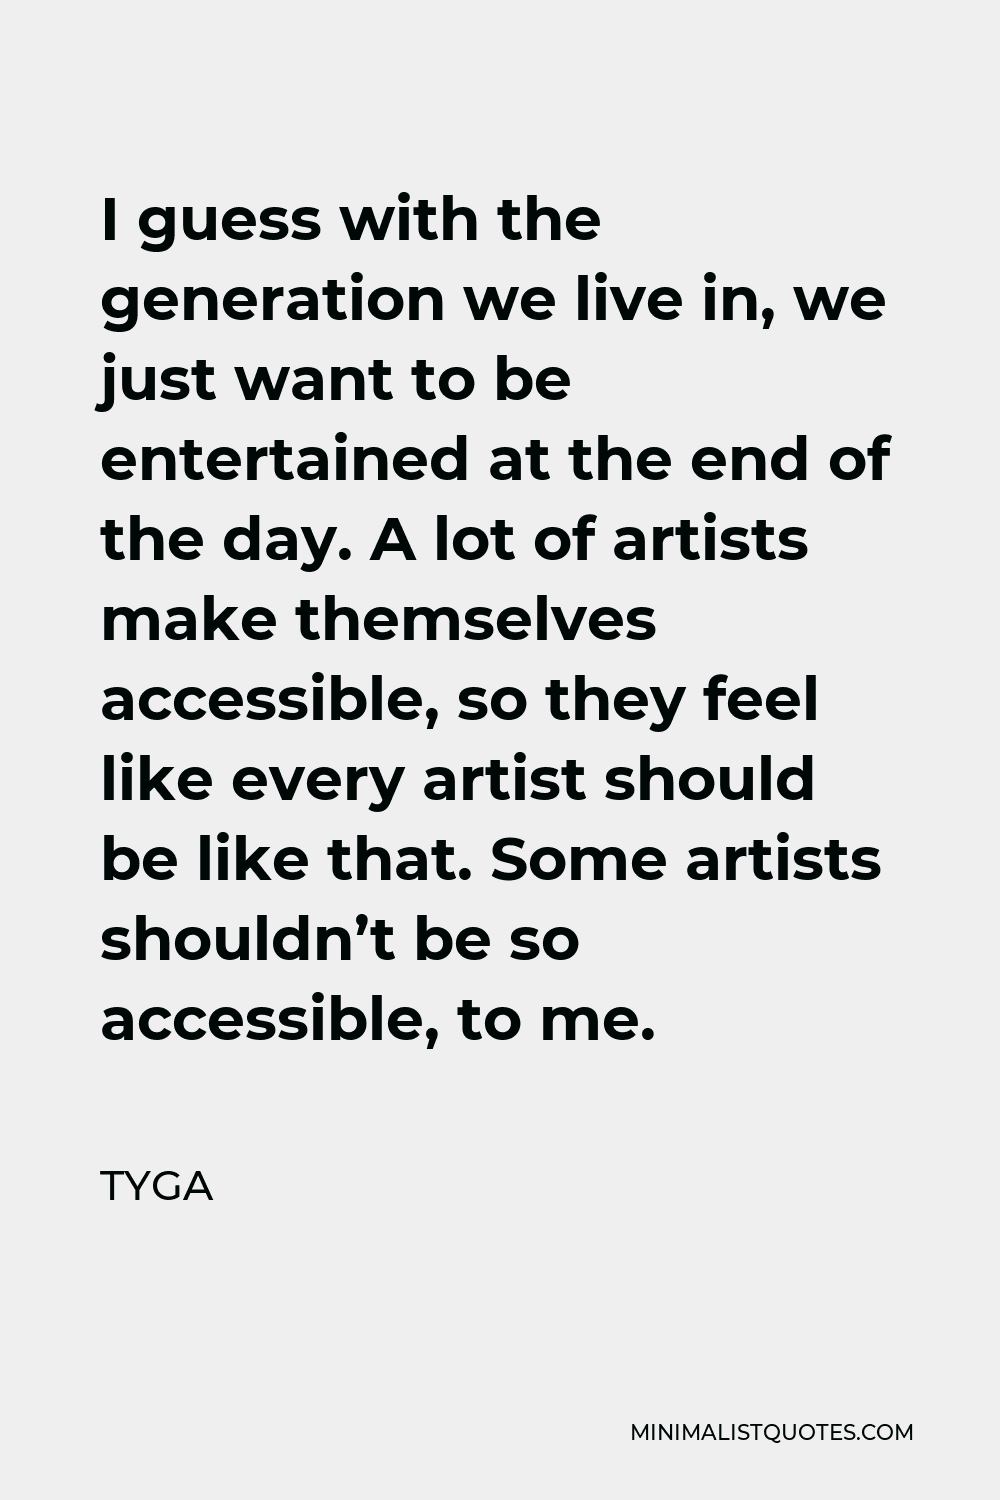 Tyga Quote - I guess with the generation we live in, we just want to be entertained at the end of the day. A lot of artists make themselves accessible, so they feel like every artist should be like that. Some artists shouldn’t be so accessible, to me.